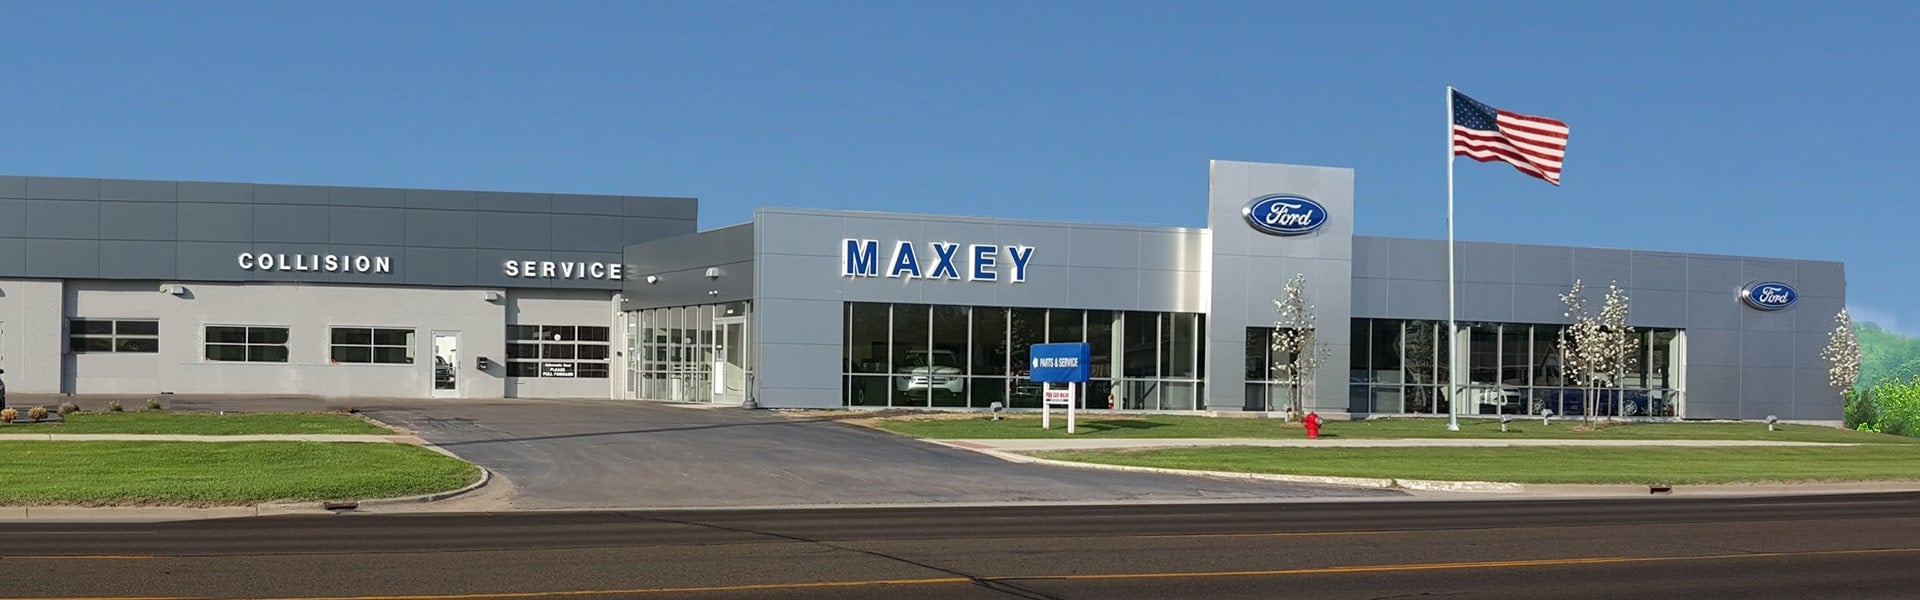 Howell, MI Ford Dealer | Bob Maxey Ford